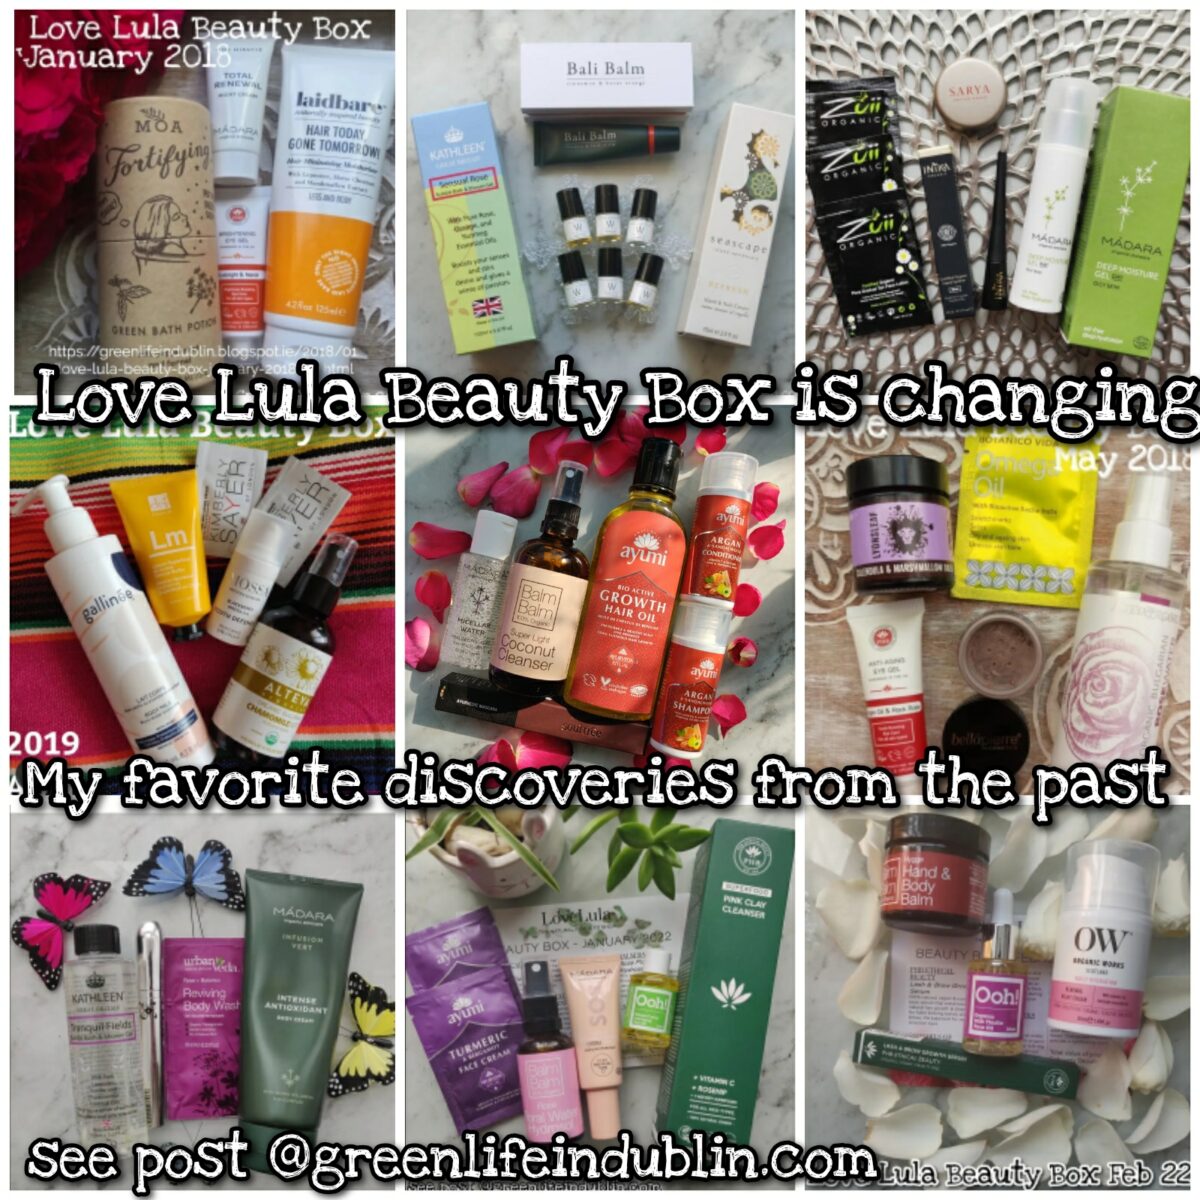 Love Lula Beauty Box is changing & my favourite discoveries from it – Green Life In Dublin